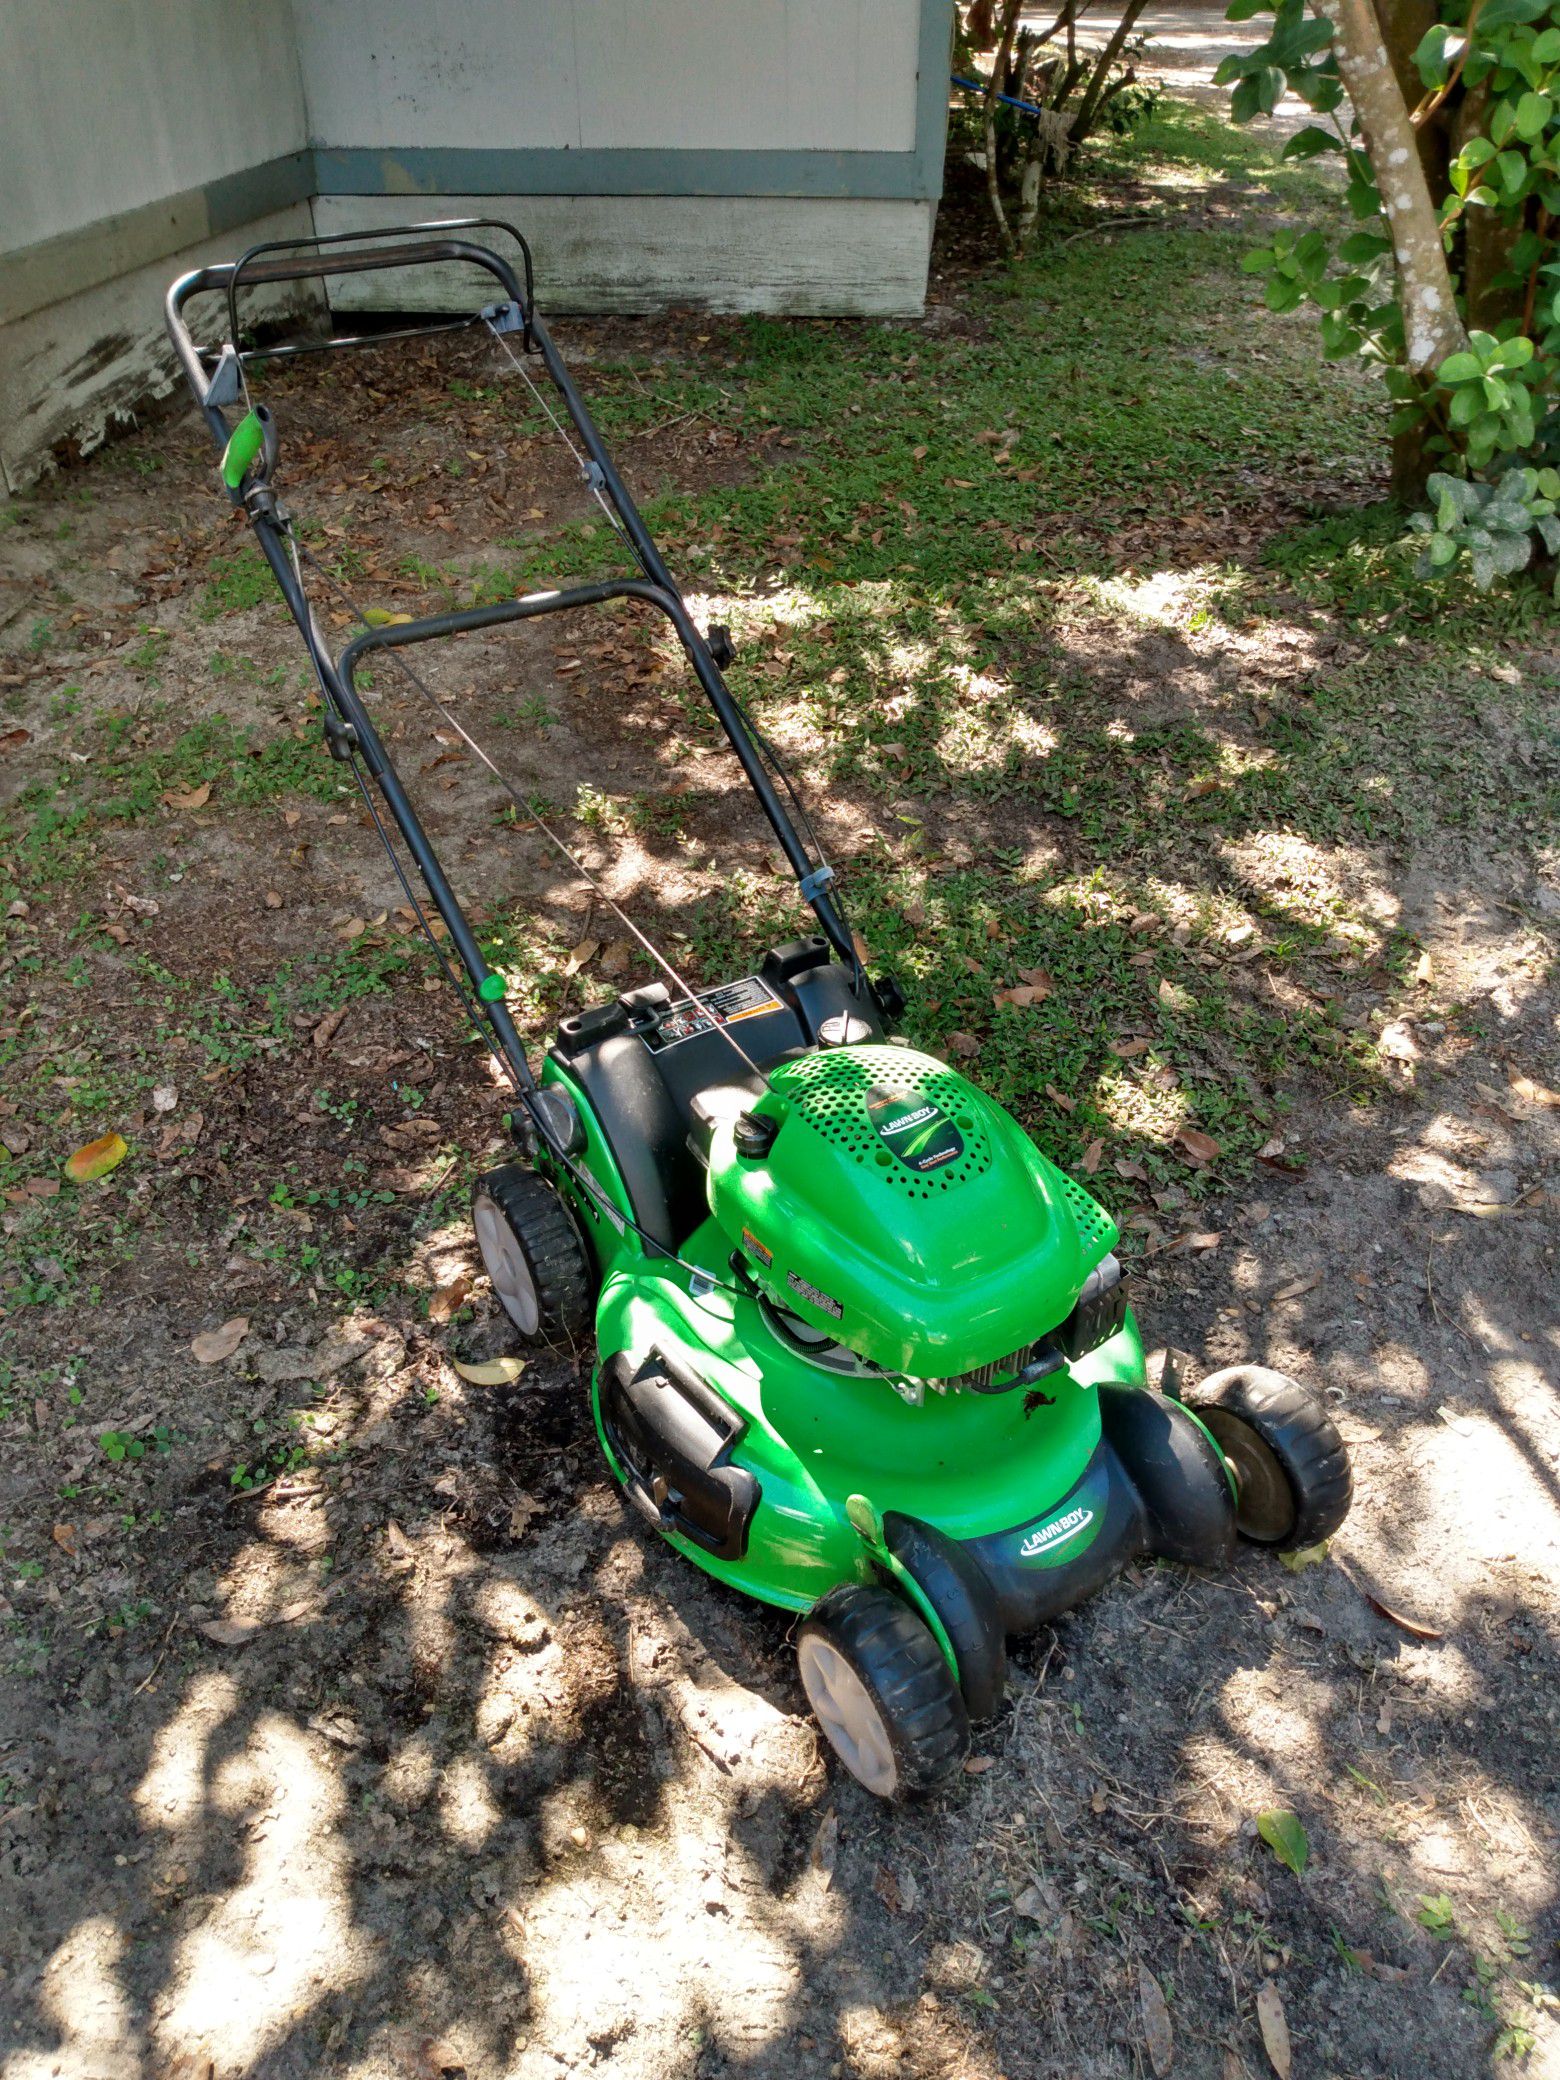 Lanw boy mower in great condition like new